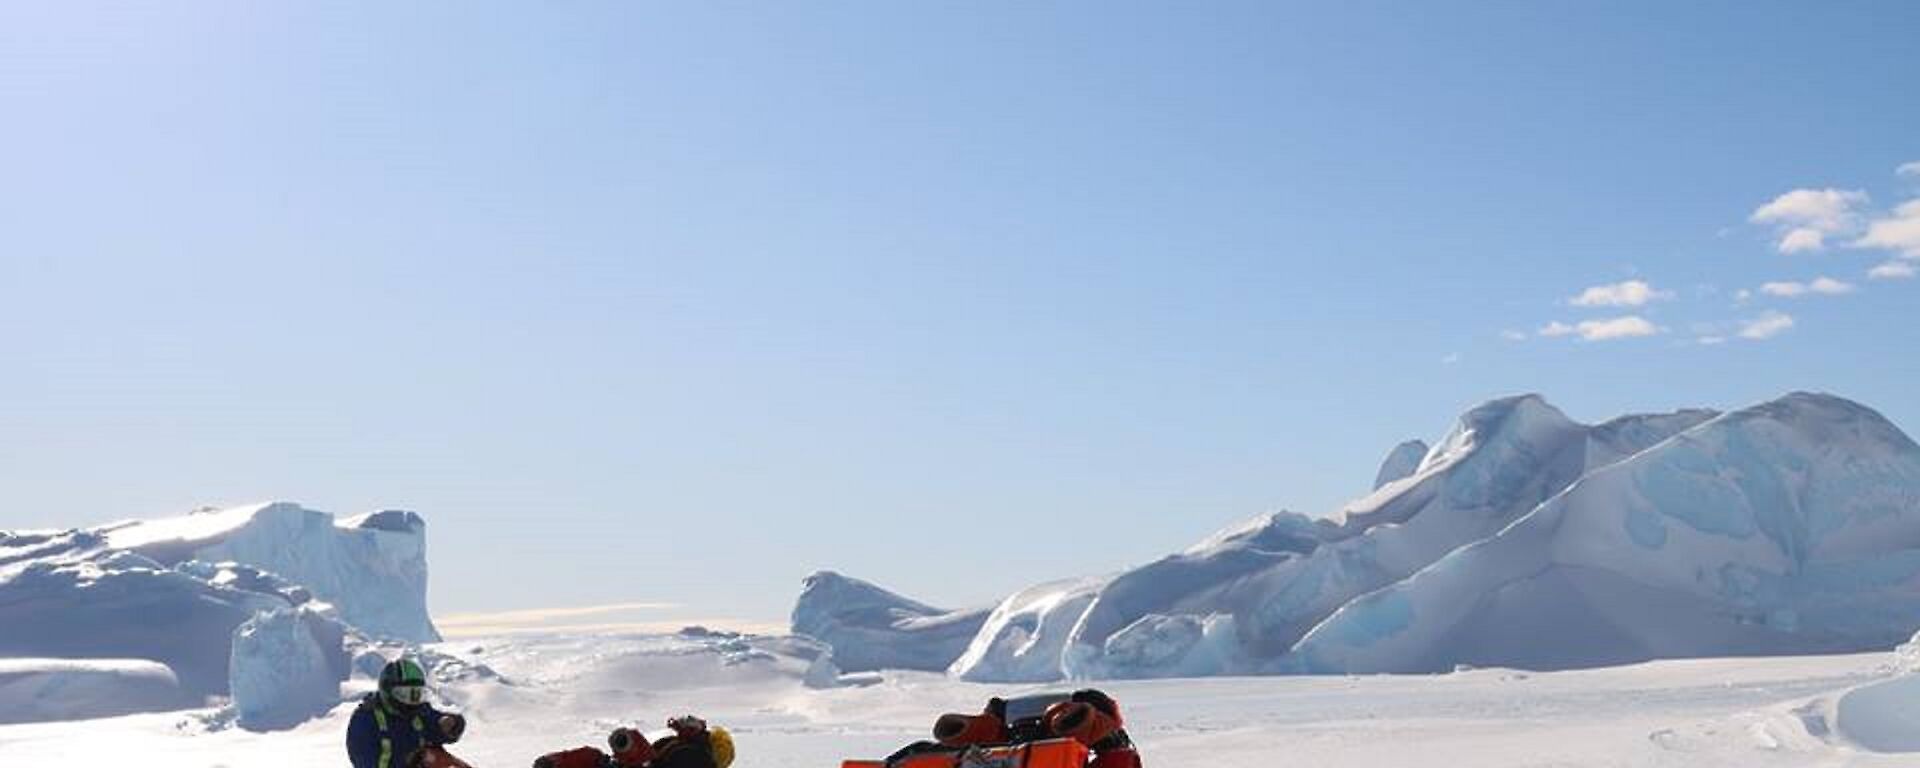 An expeditioner with two quad bikes on the sea ice